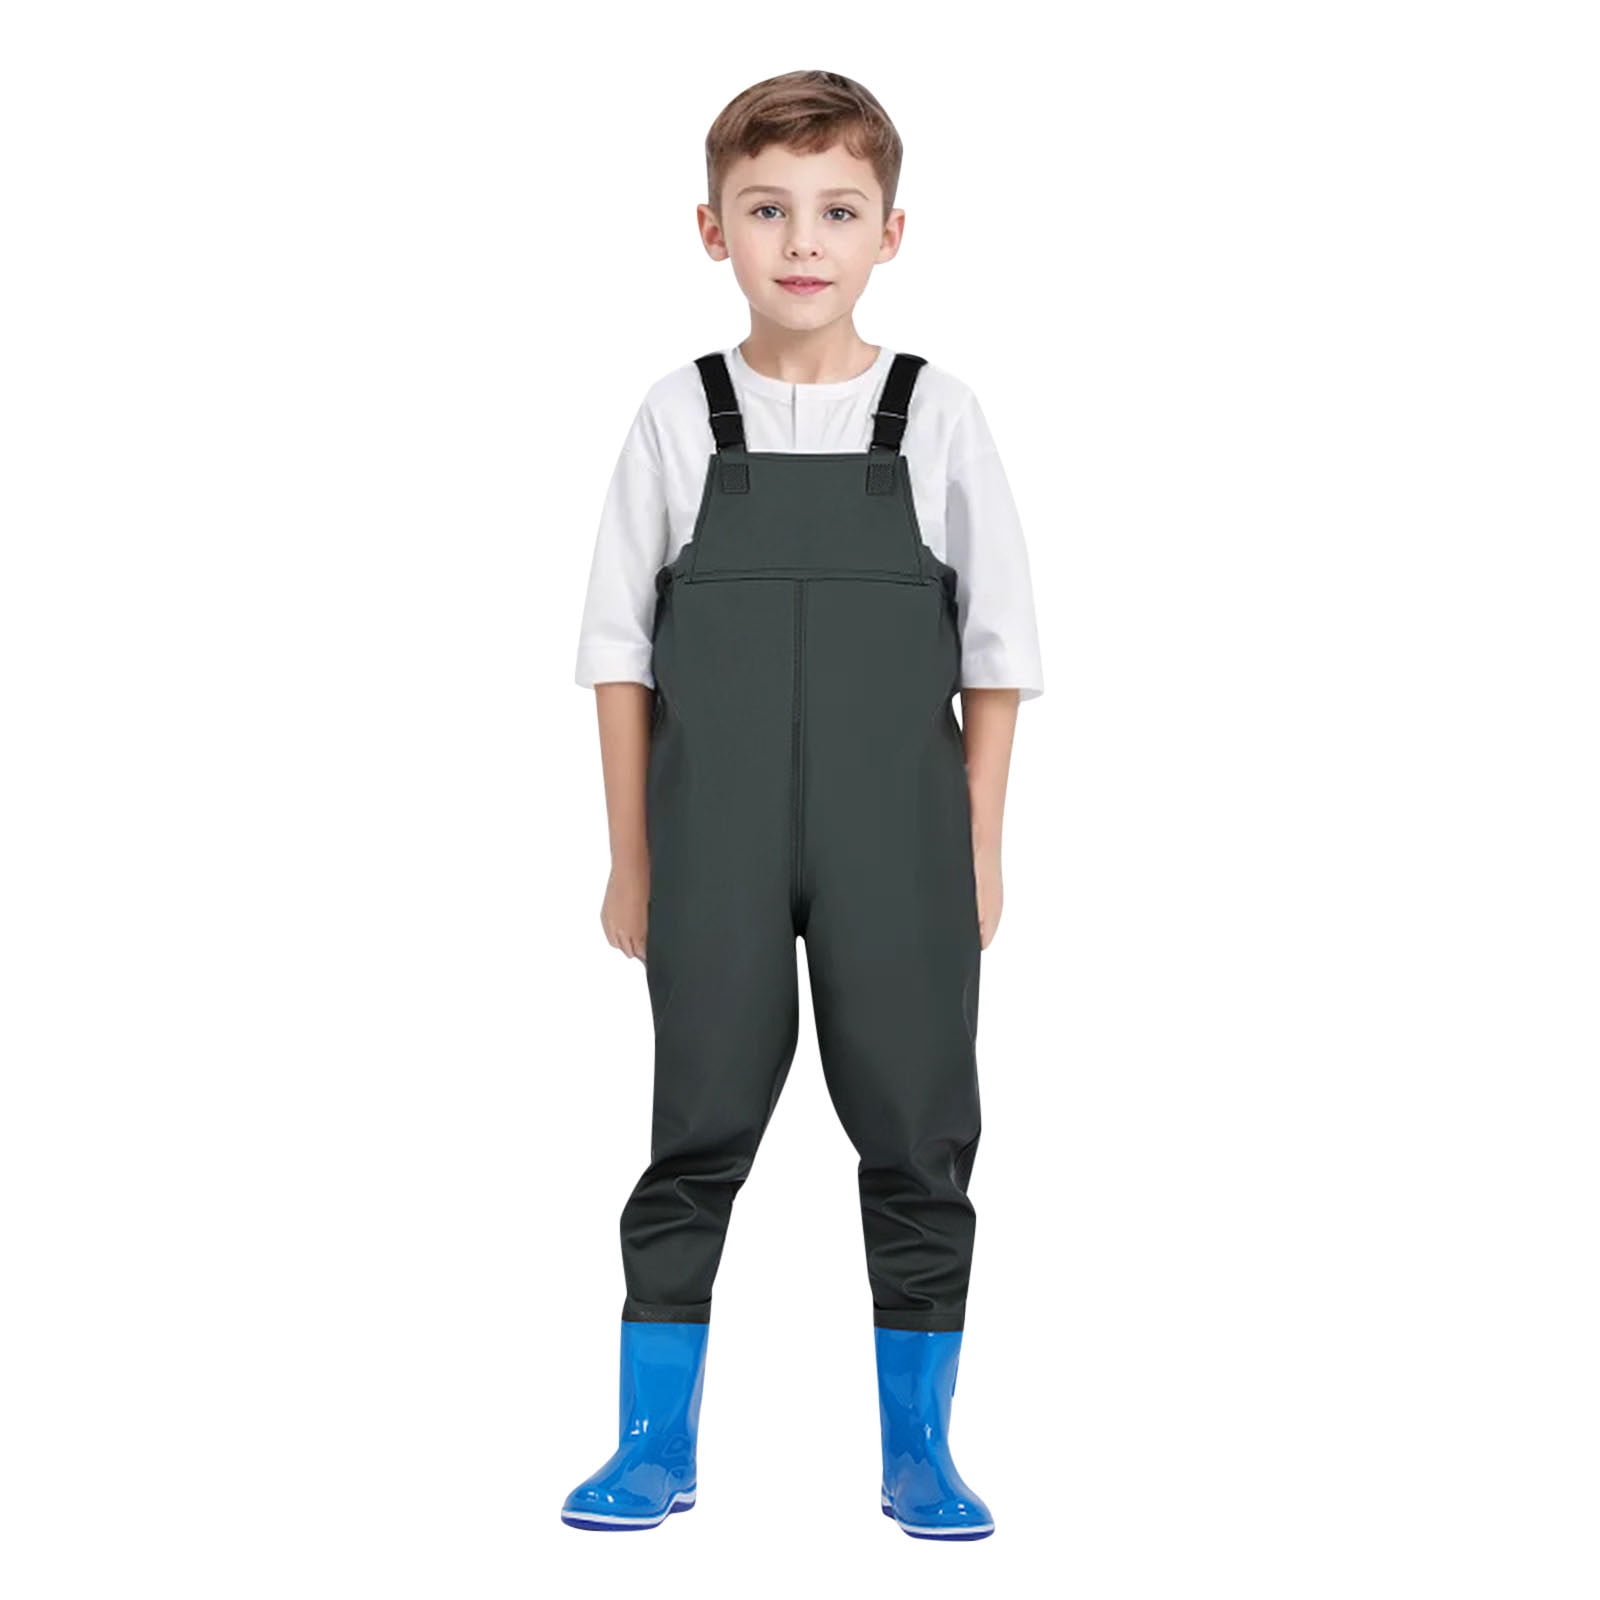 WEAIXIMIUNG Kids Baby Boy Clothes 9-12 Months Romper Kids Chest Waders  Youth Fishing Waders for Toddler Children Water Proof Waders with Boots AG  32 